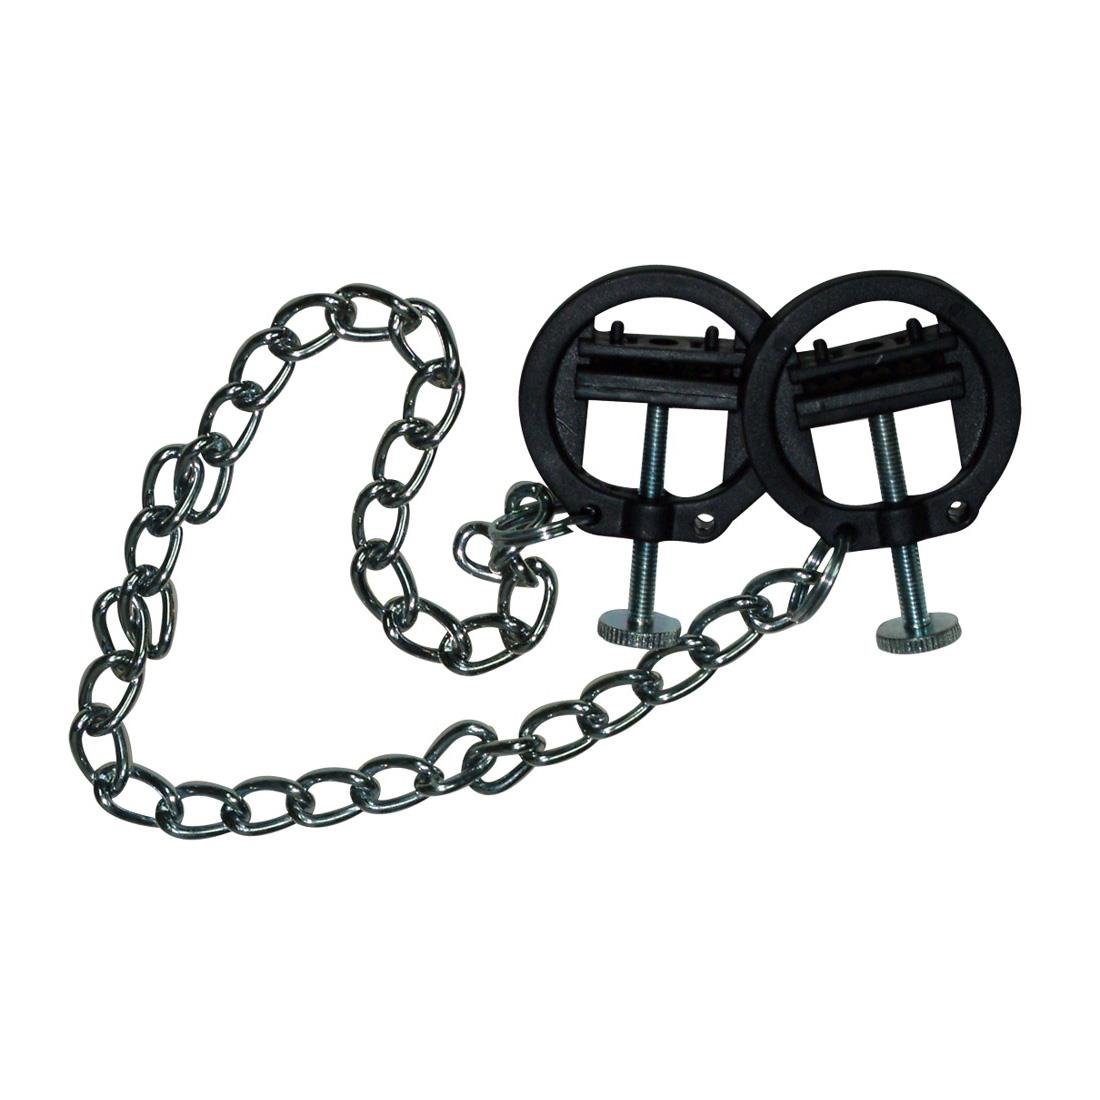 Round Screw Nipple Clamps with Metal Chain from Fetish Collection.